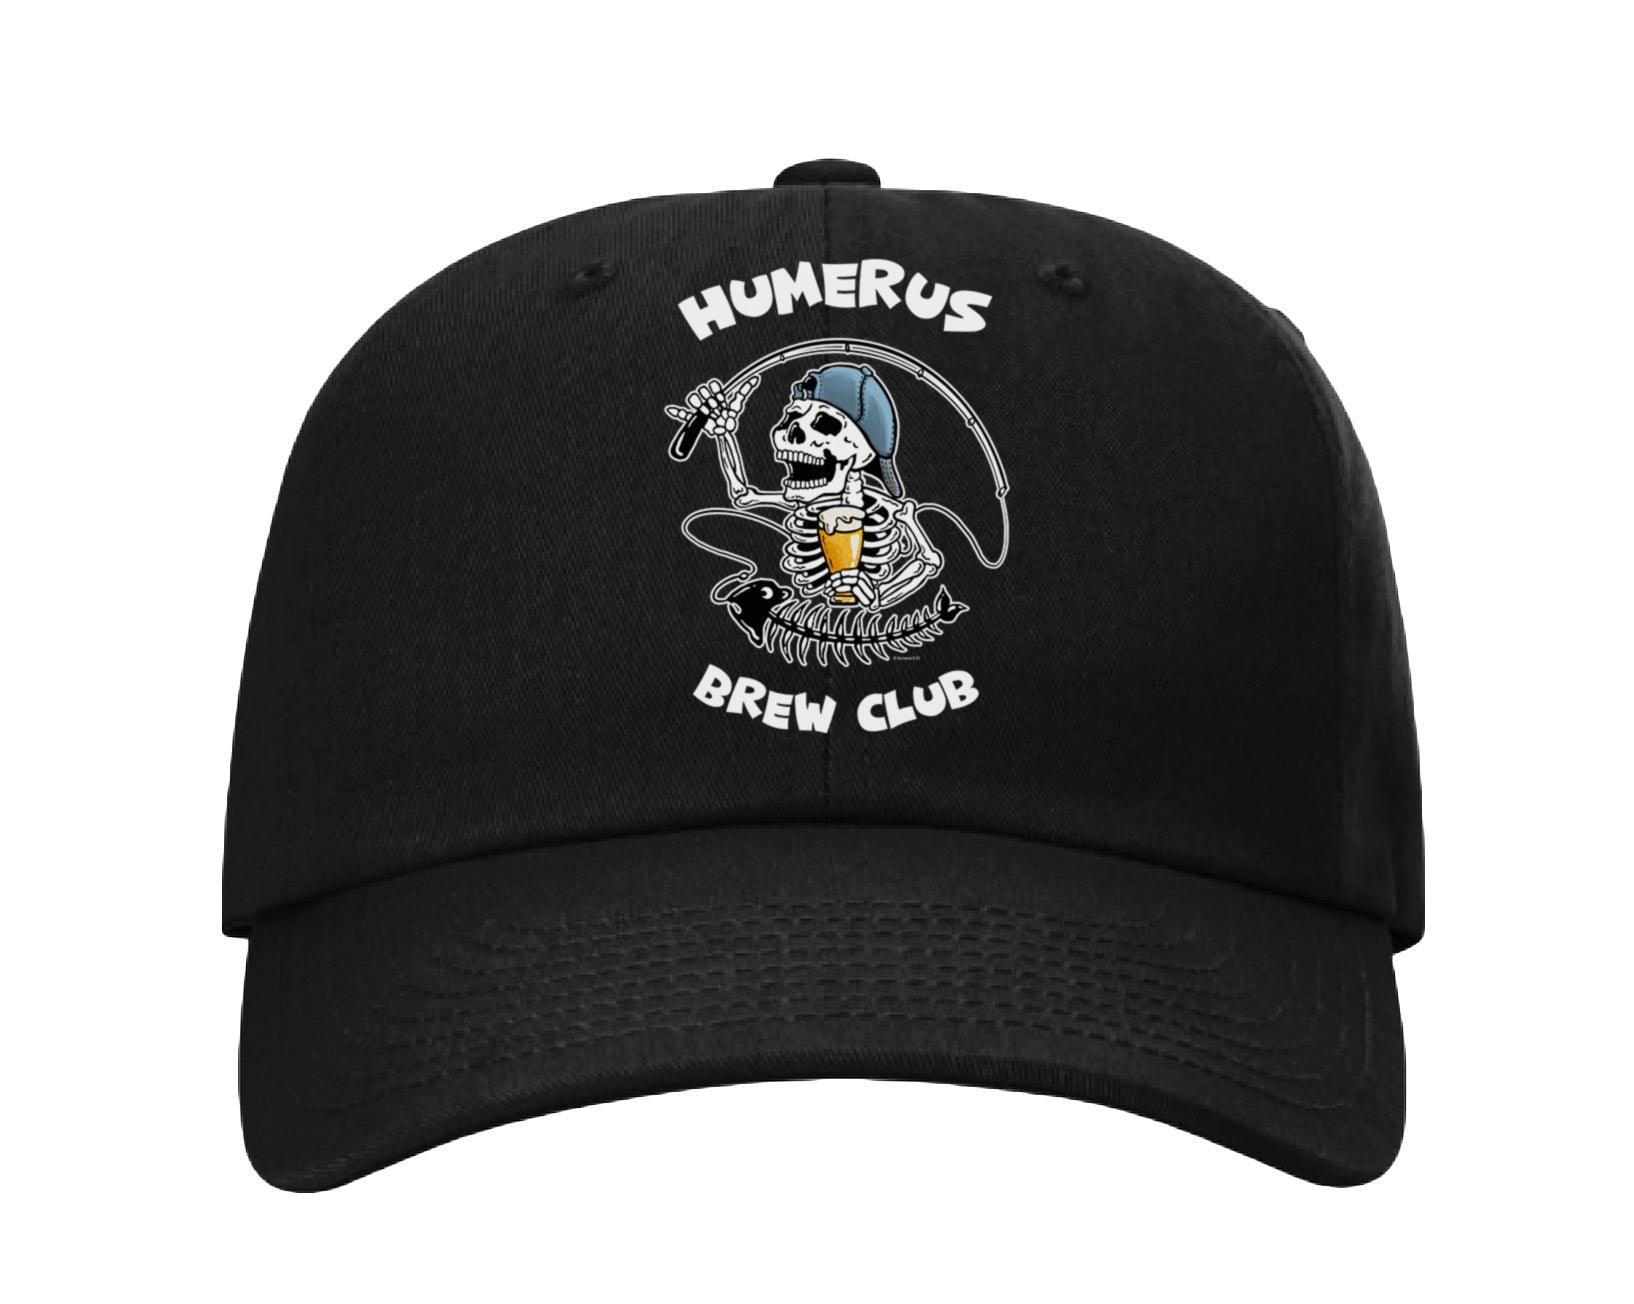 Humerus Brew Club with Fishing Pole - Dad Hat One Size Fits Most / Solid Black / Cotton-Poly/Nylon Mesh